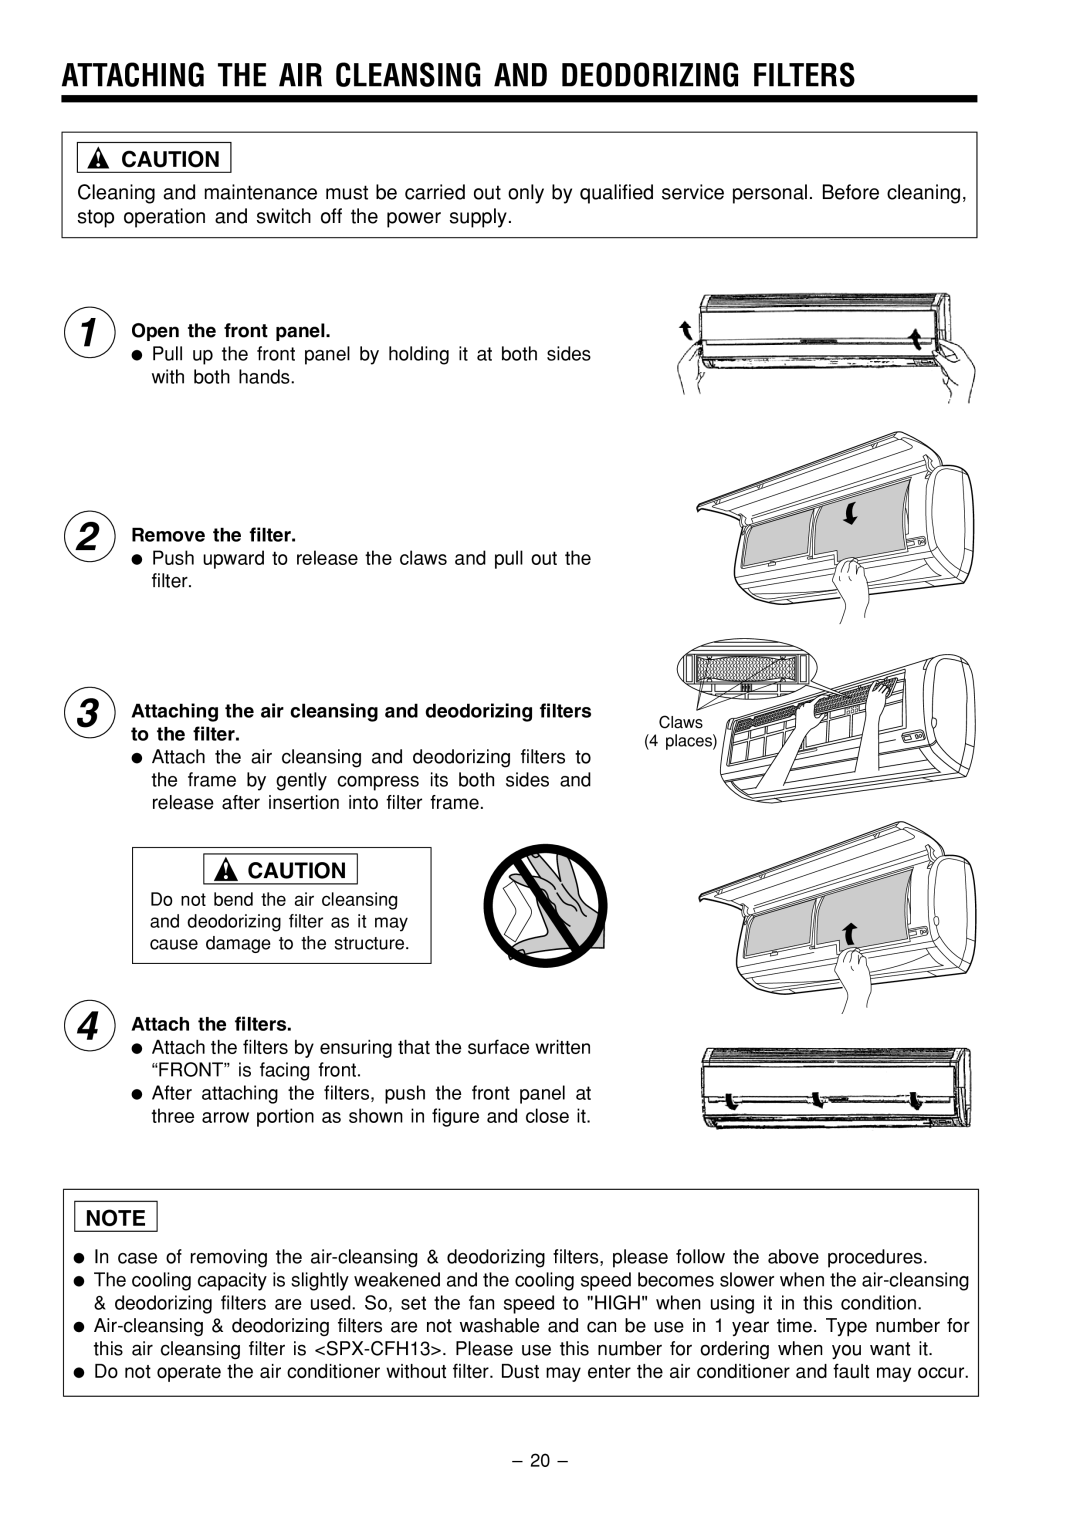 Hitachi RAS-80YHA instruction manual 1 2, Open the front panel, Remove the filter, Attach the filters 